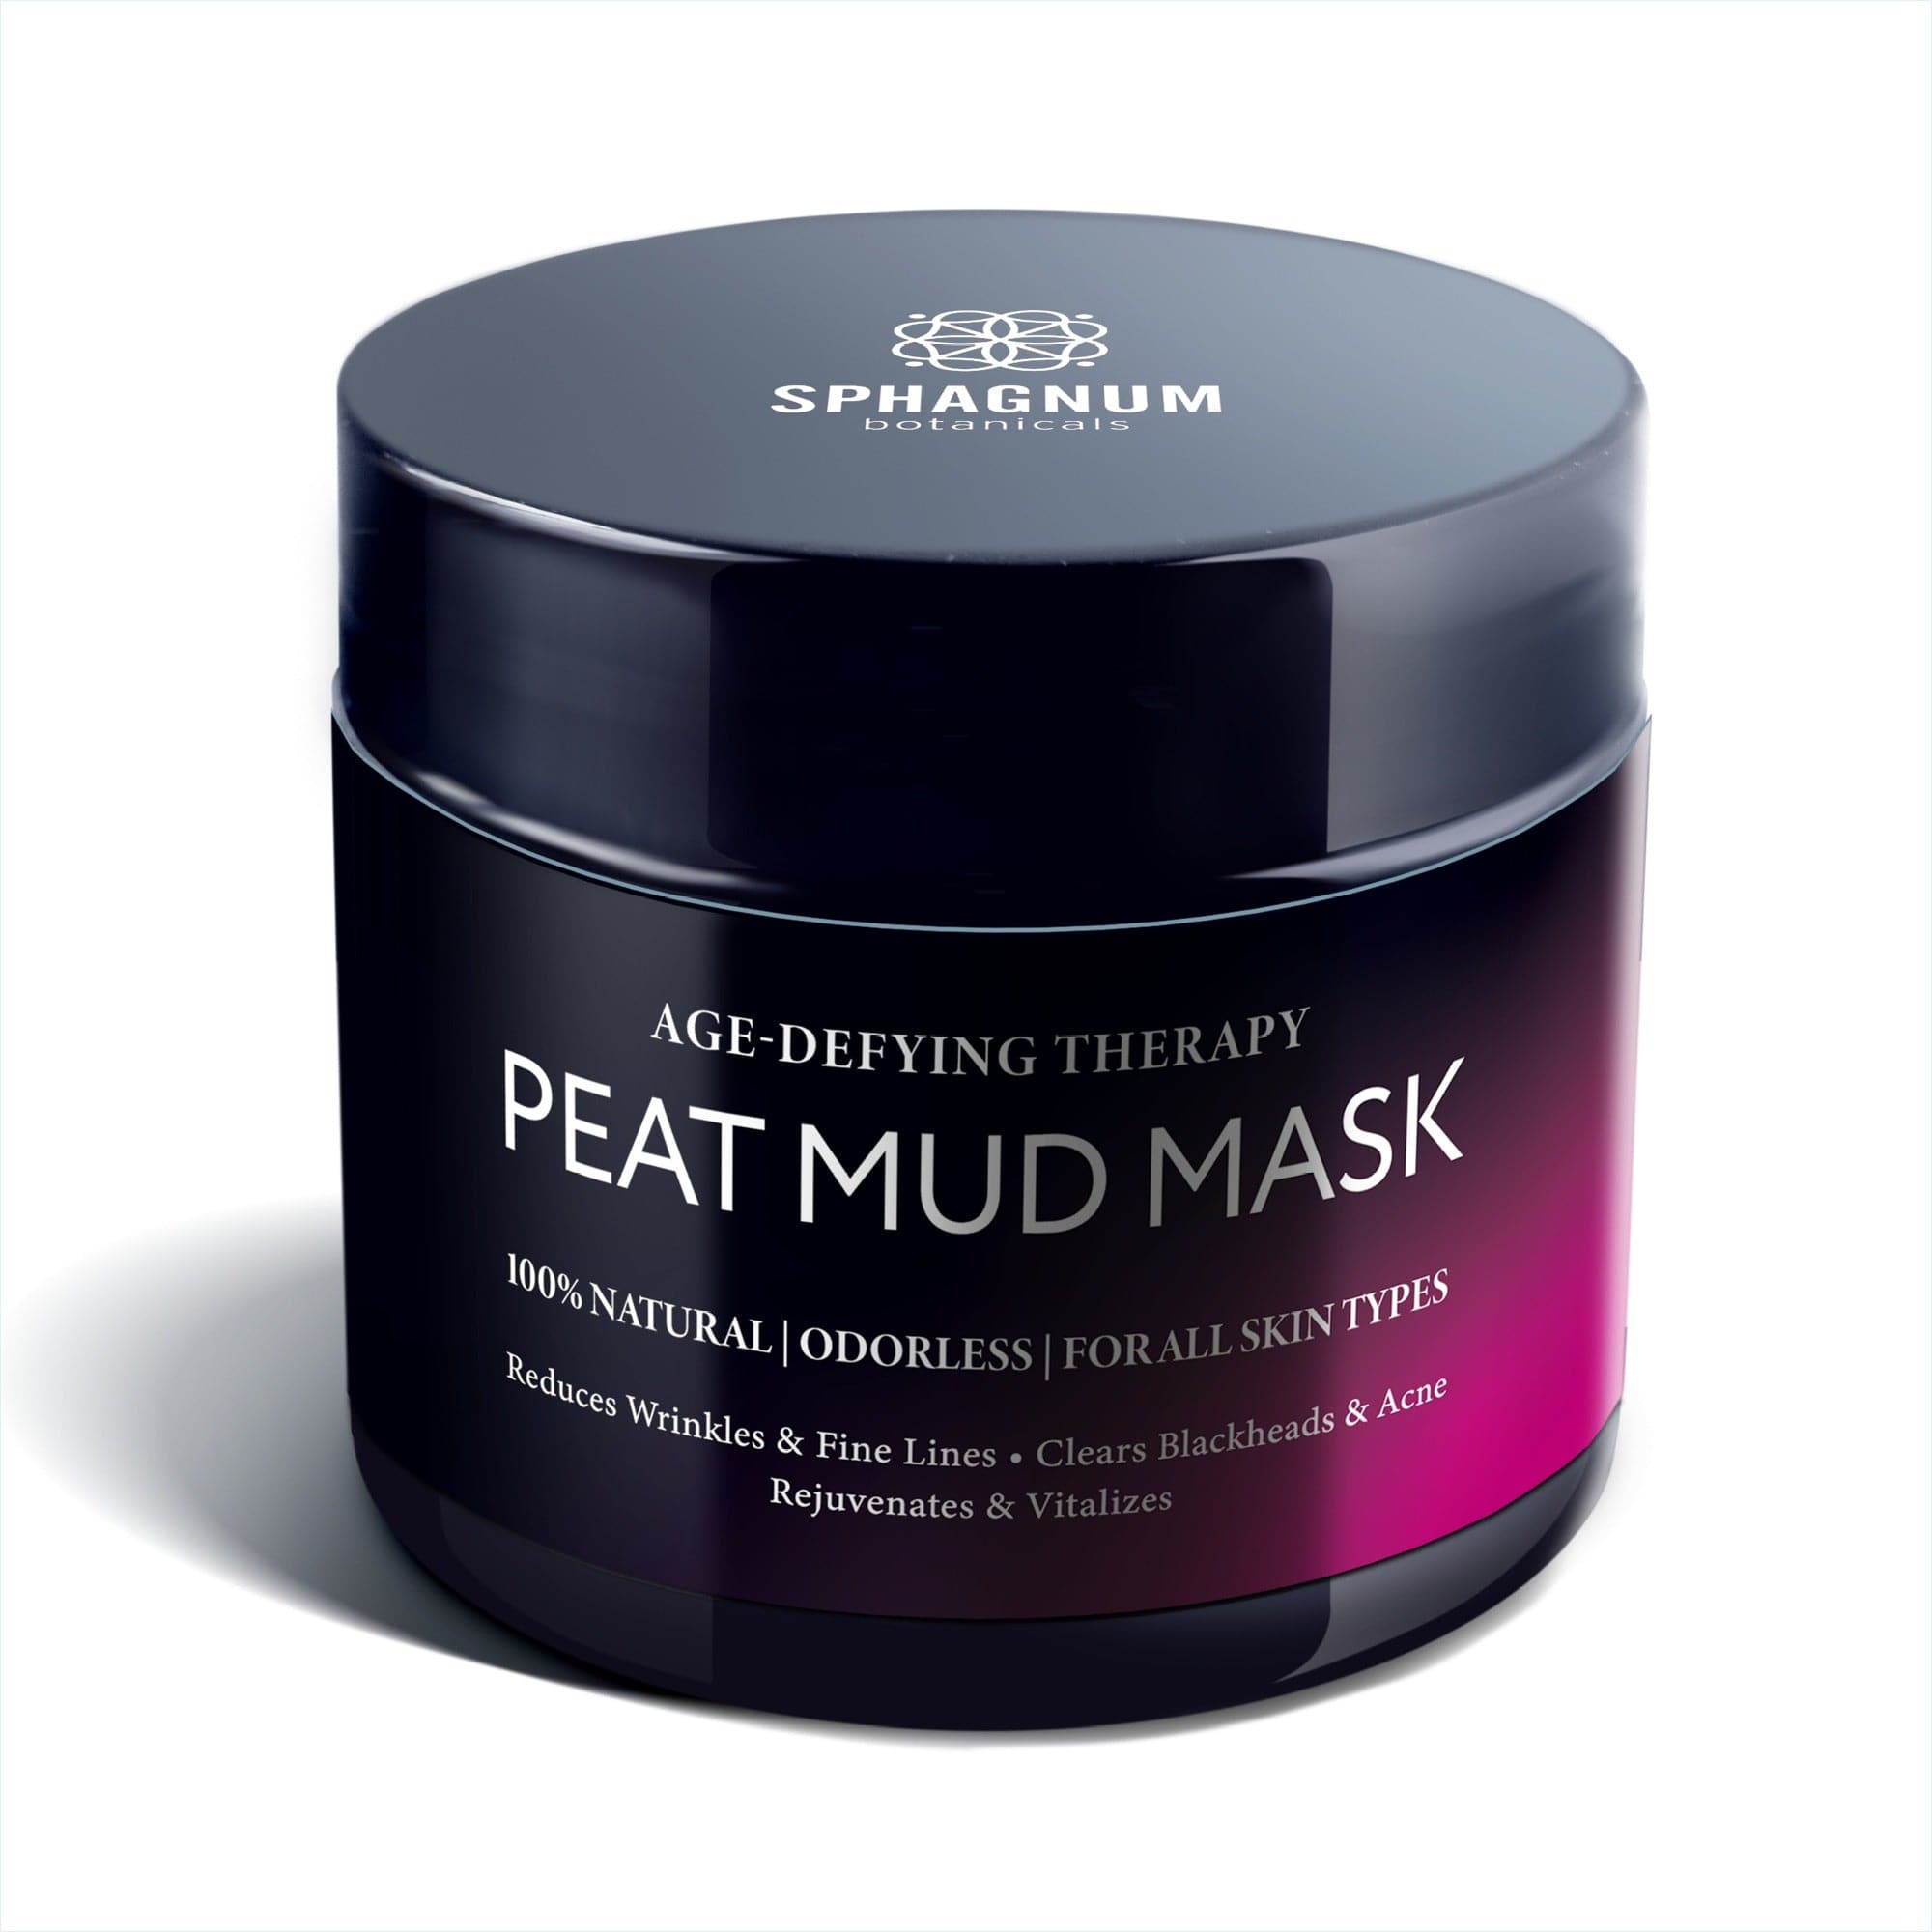 Age-Defying Therapy Peat Mud Mask